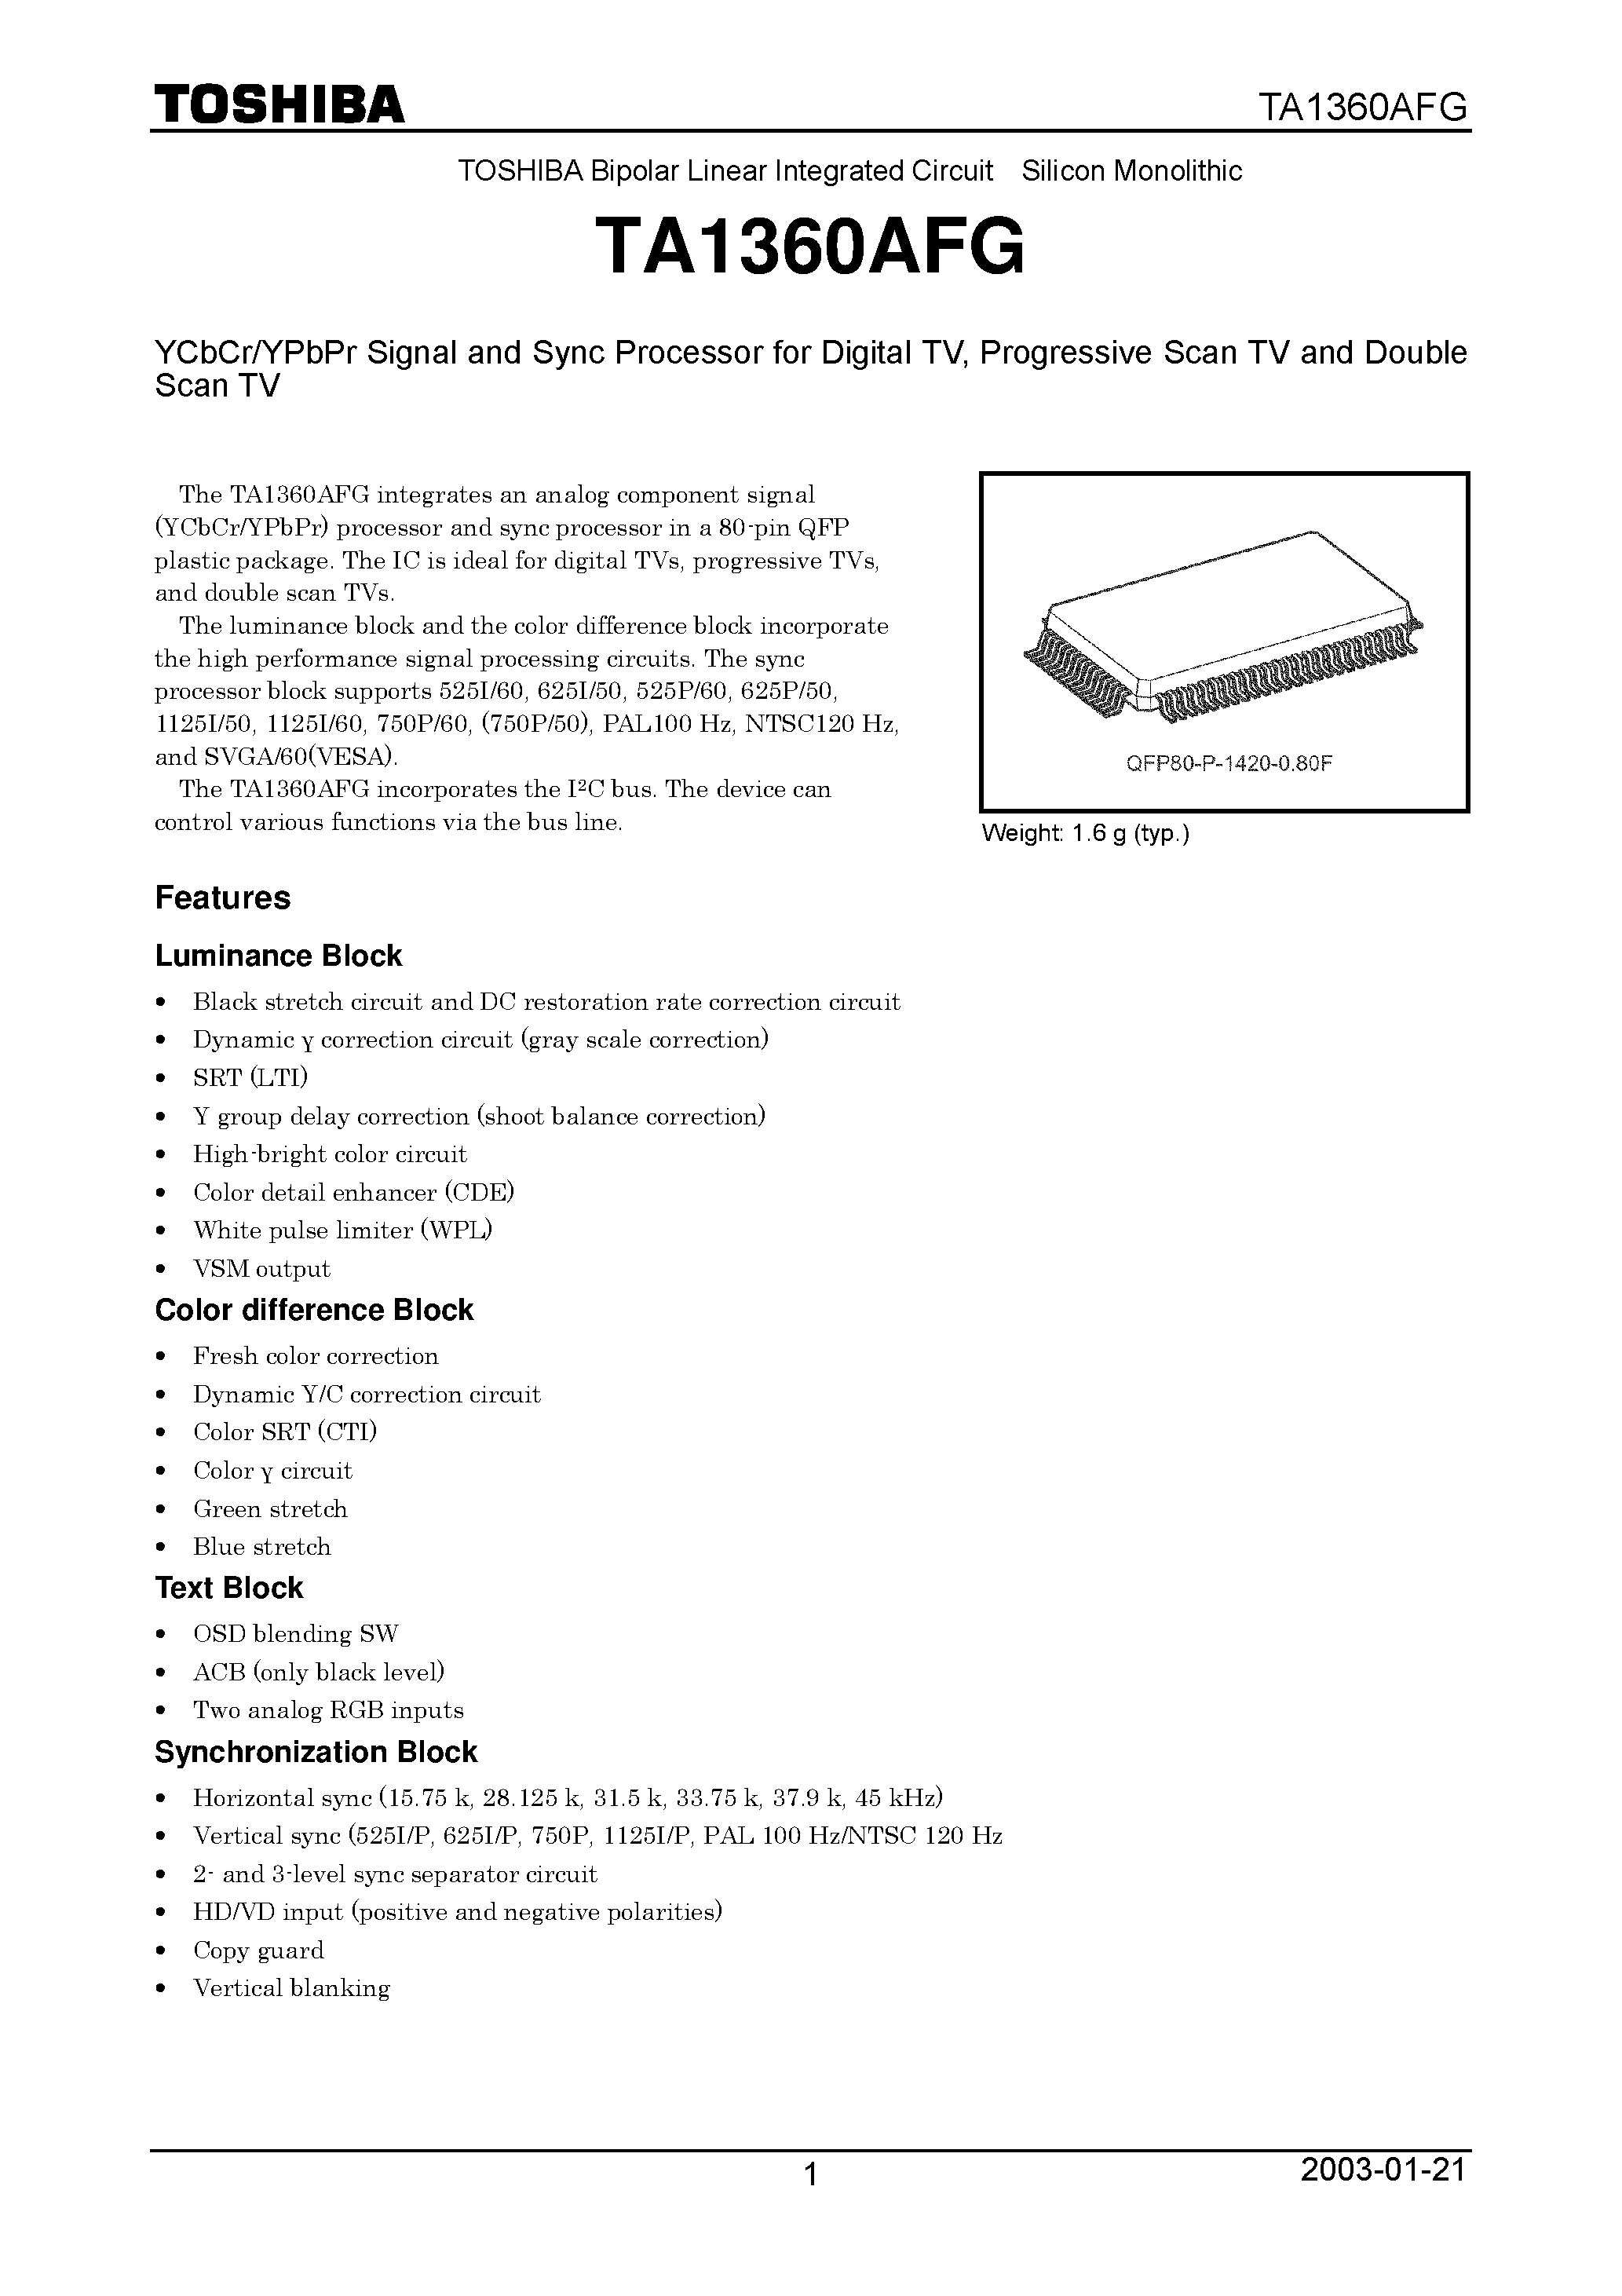 Datasheet TA1360AFG - YCbCr/YPbPr Signal and Sync Processor for Digital TV page 1